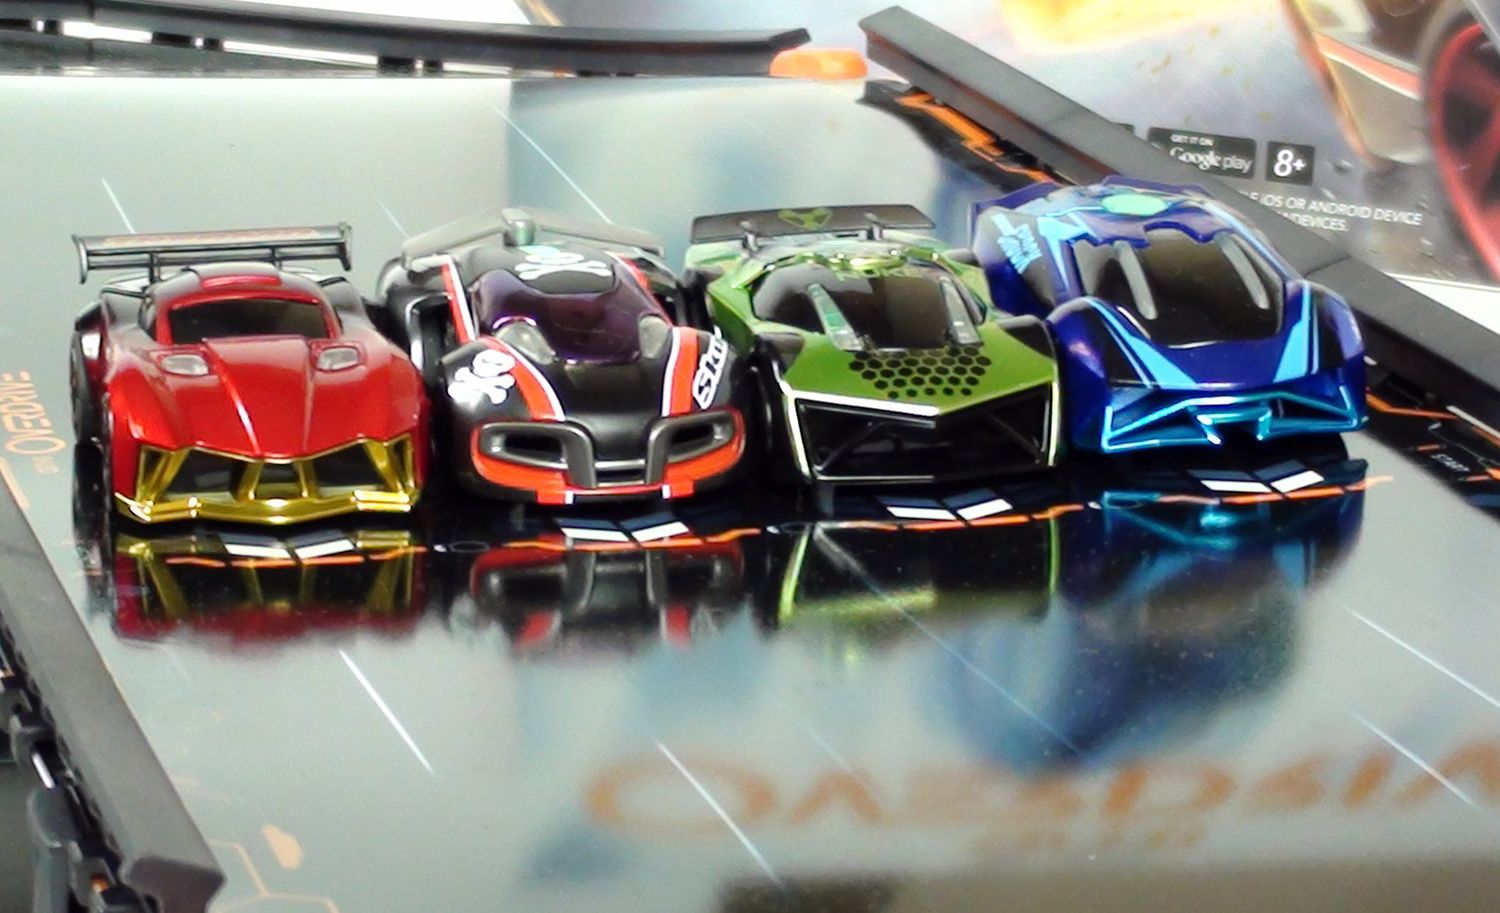 Game: Anki Overdrive Review